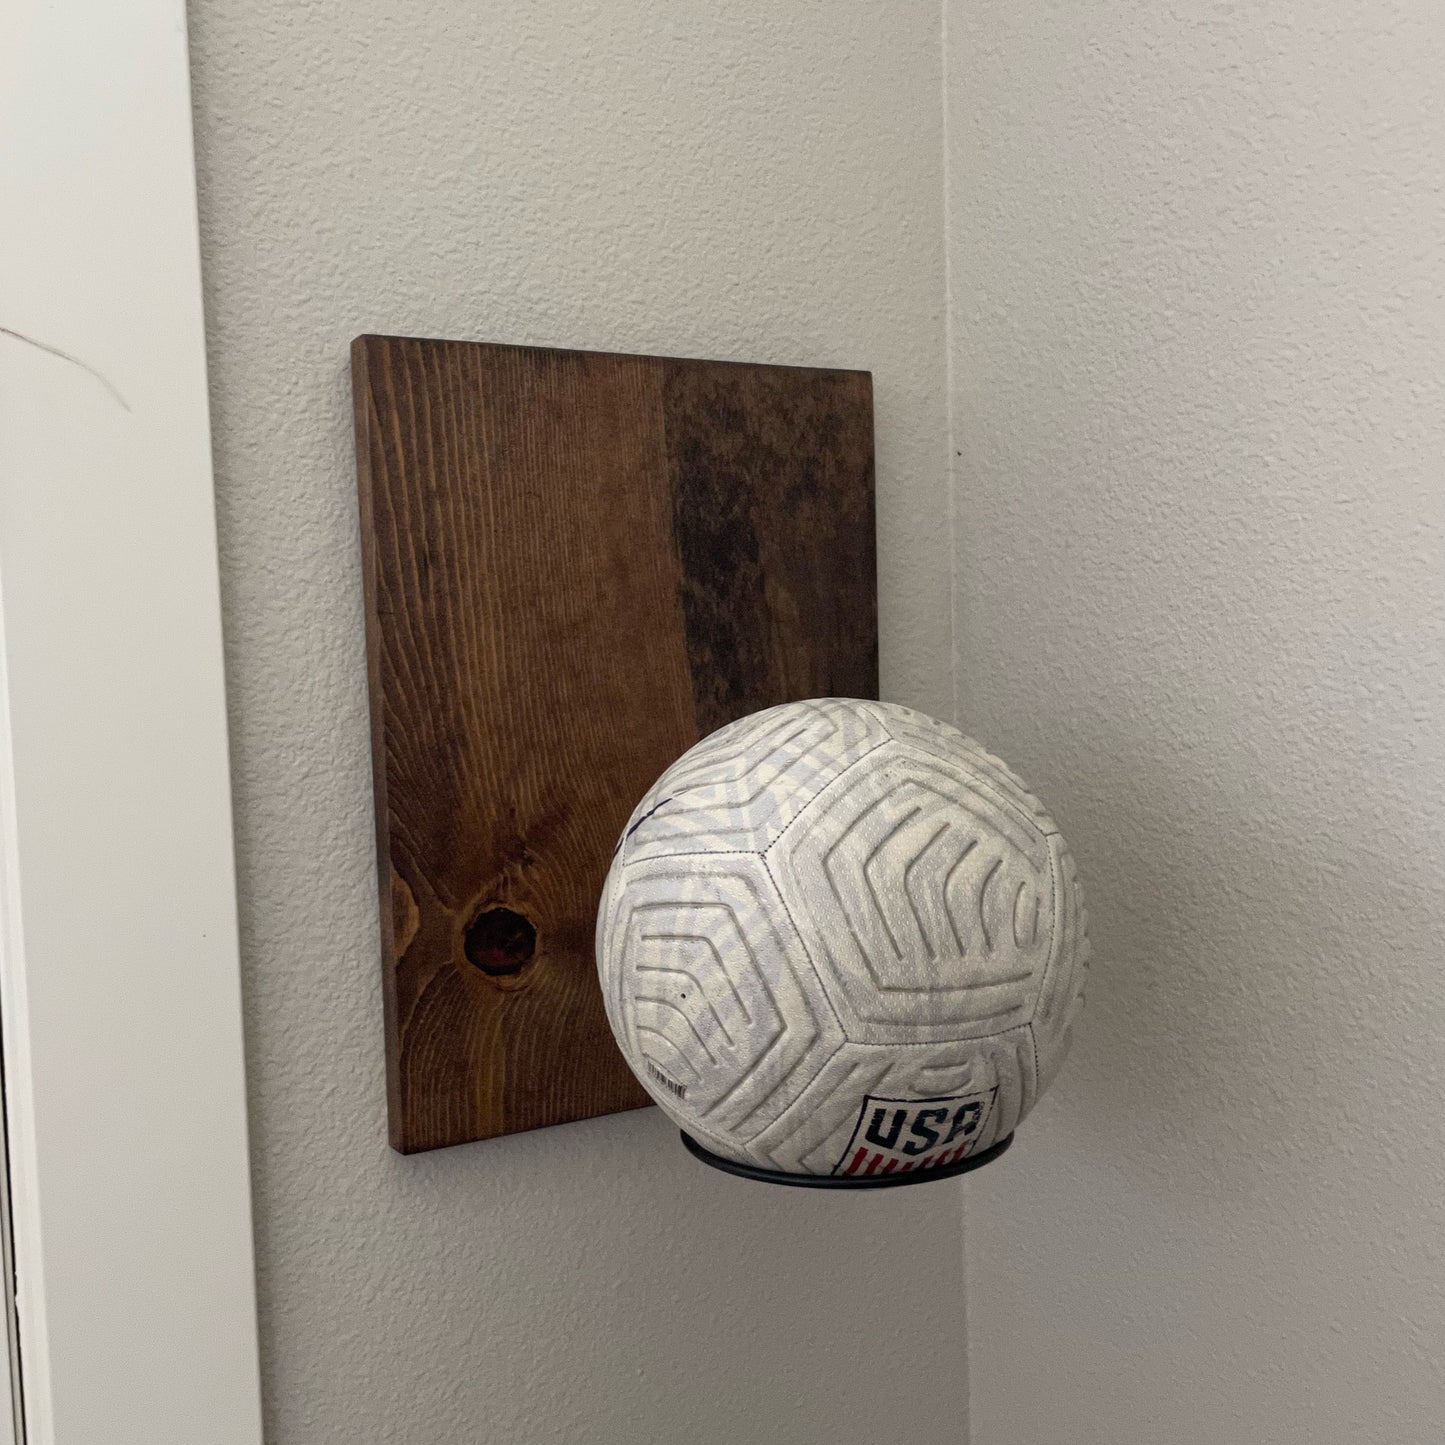 Personalized Ball Display Sign